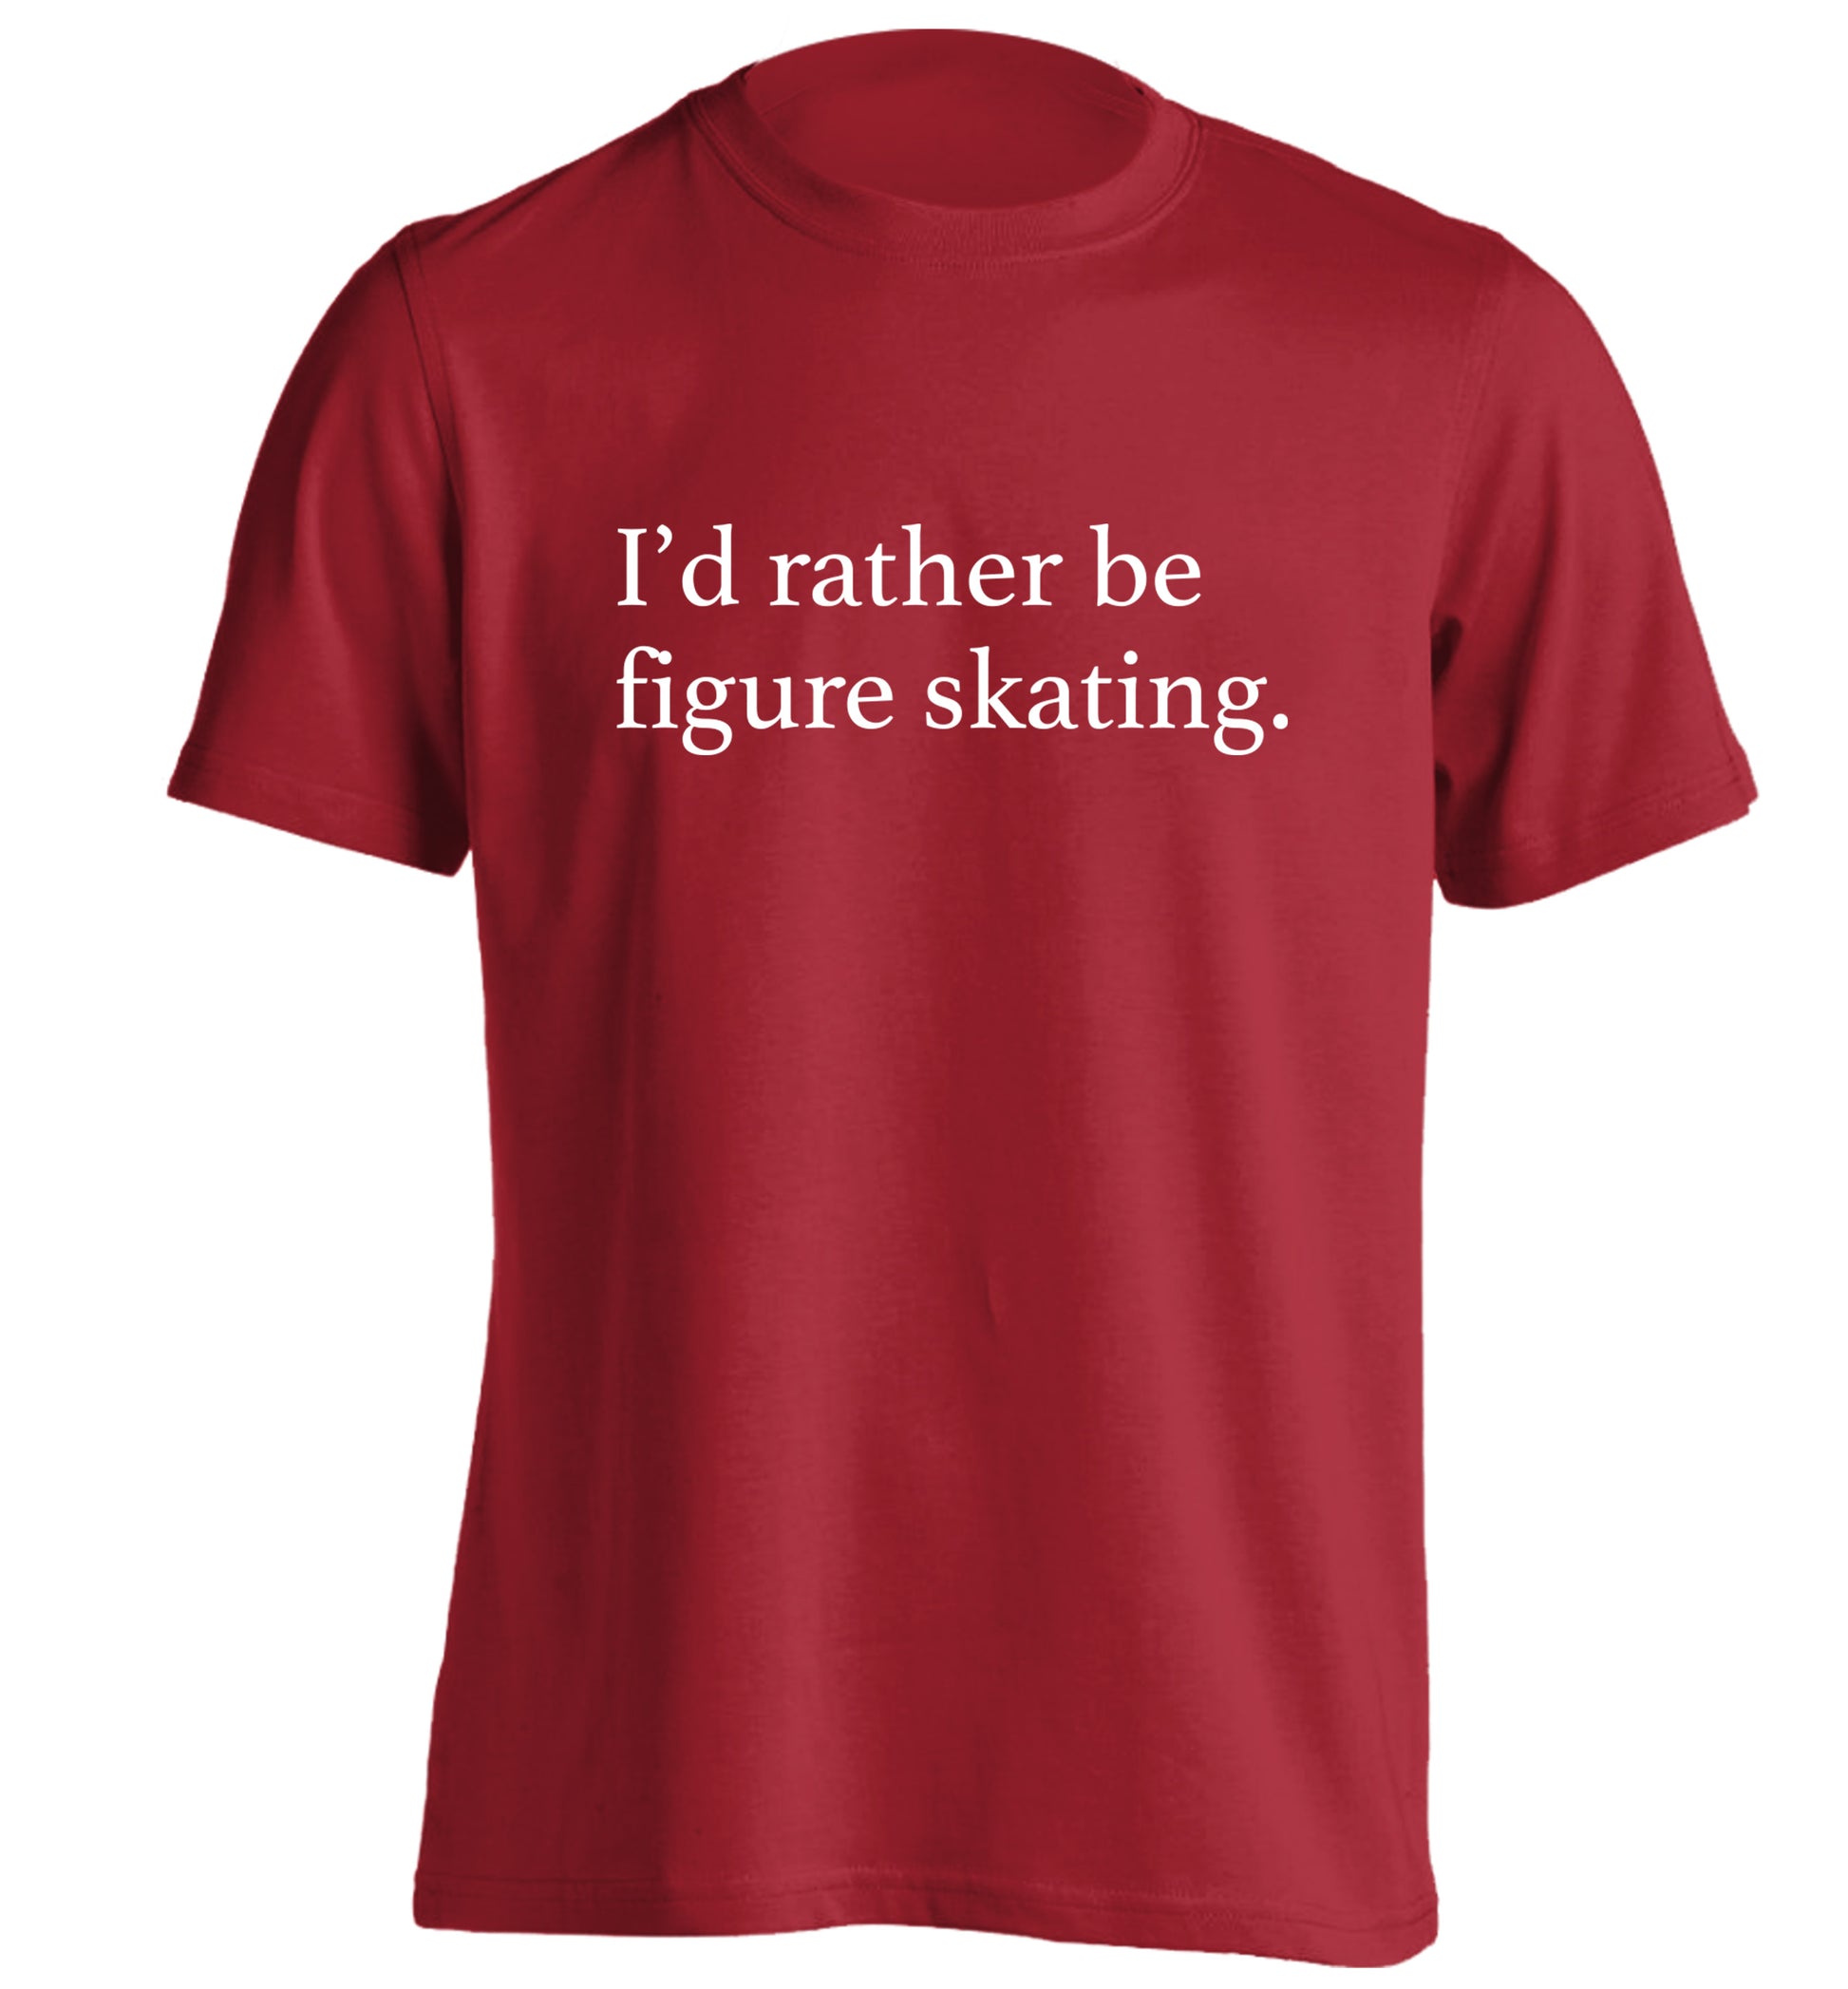 I'd rather be figure skating adults unisexred Tshirt 2XL